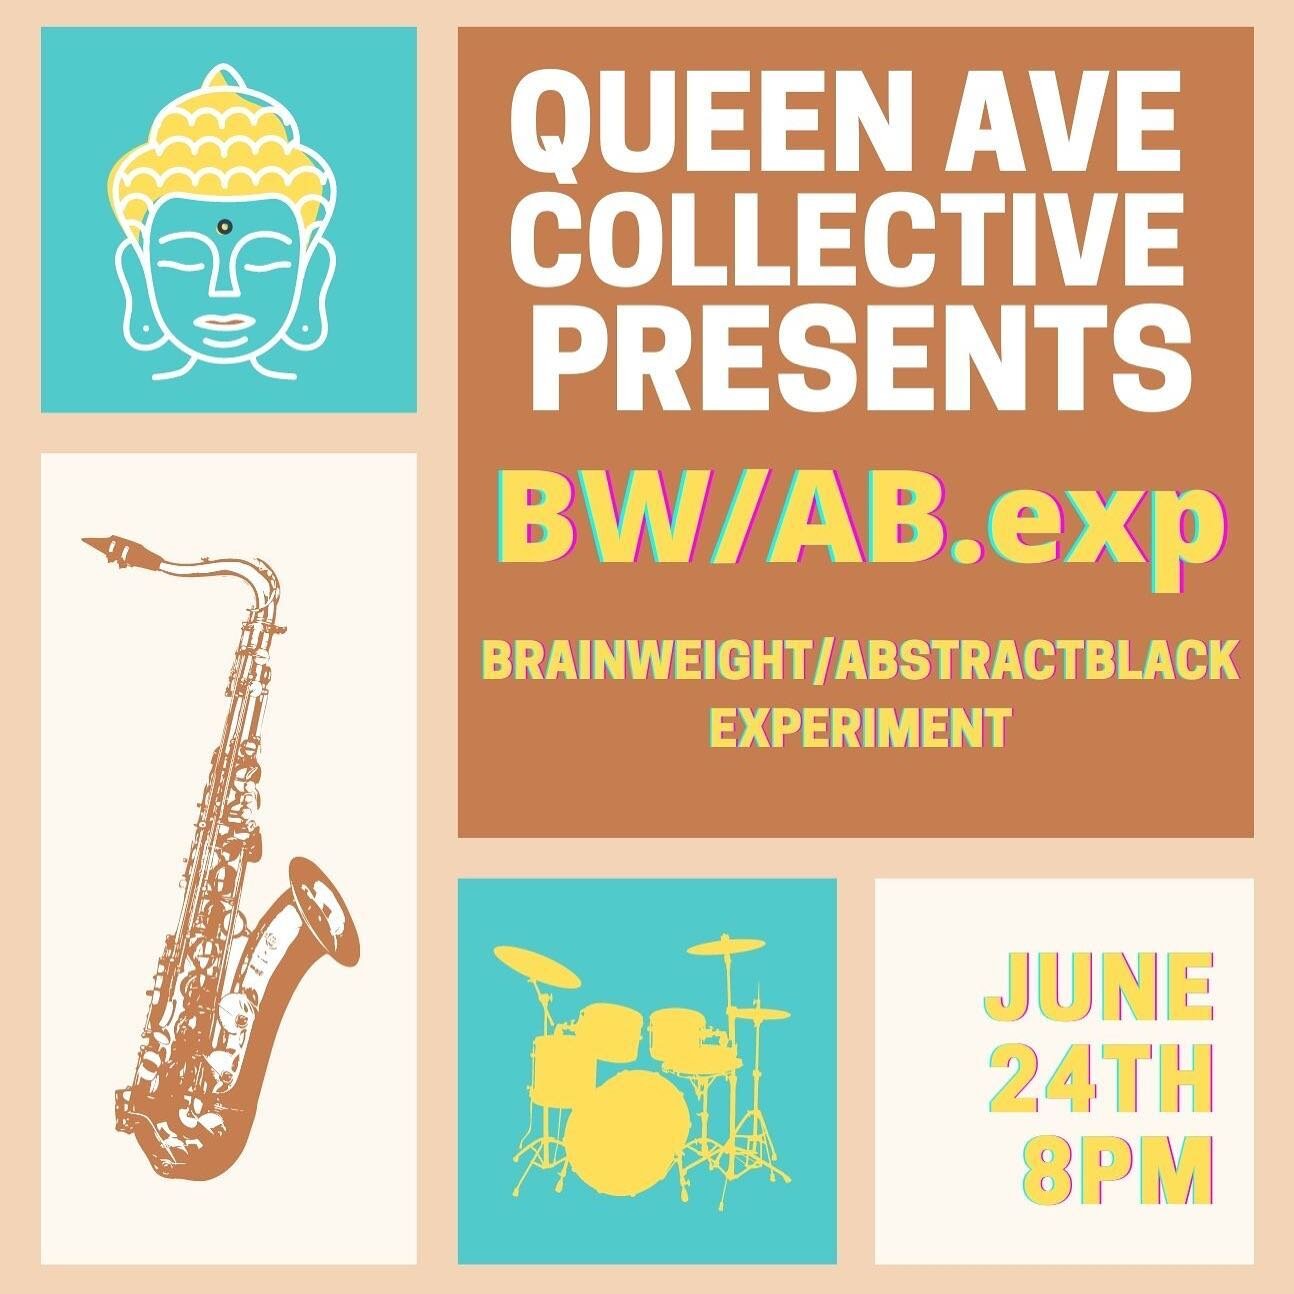 This Thursday, Queen Ave Presents is bringing a very special collaboration to our room for your viewing pleasure. We are so stoked for you to tune in for BW/AB.exp, the magical experiments of percussion wizard @brainweightcaleb and the multitalented 